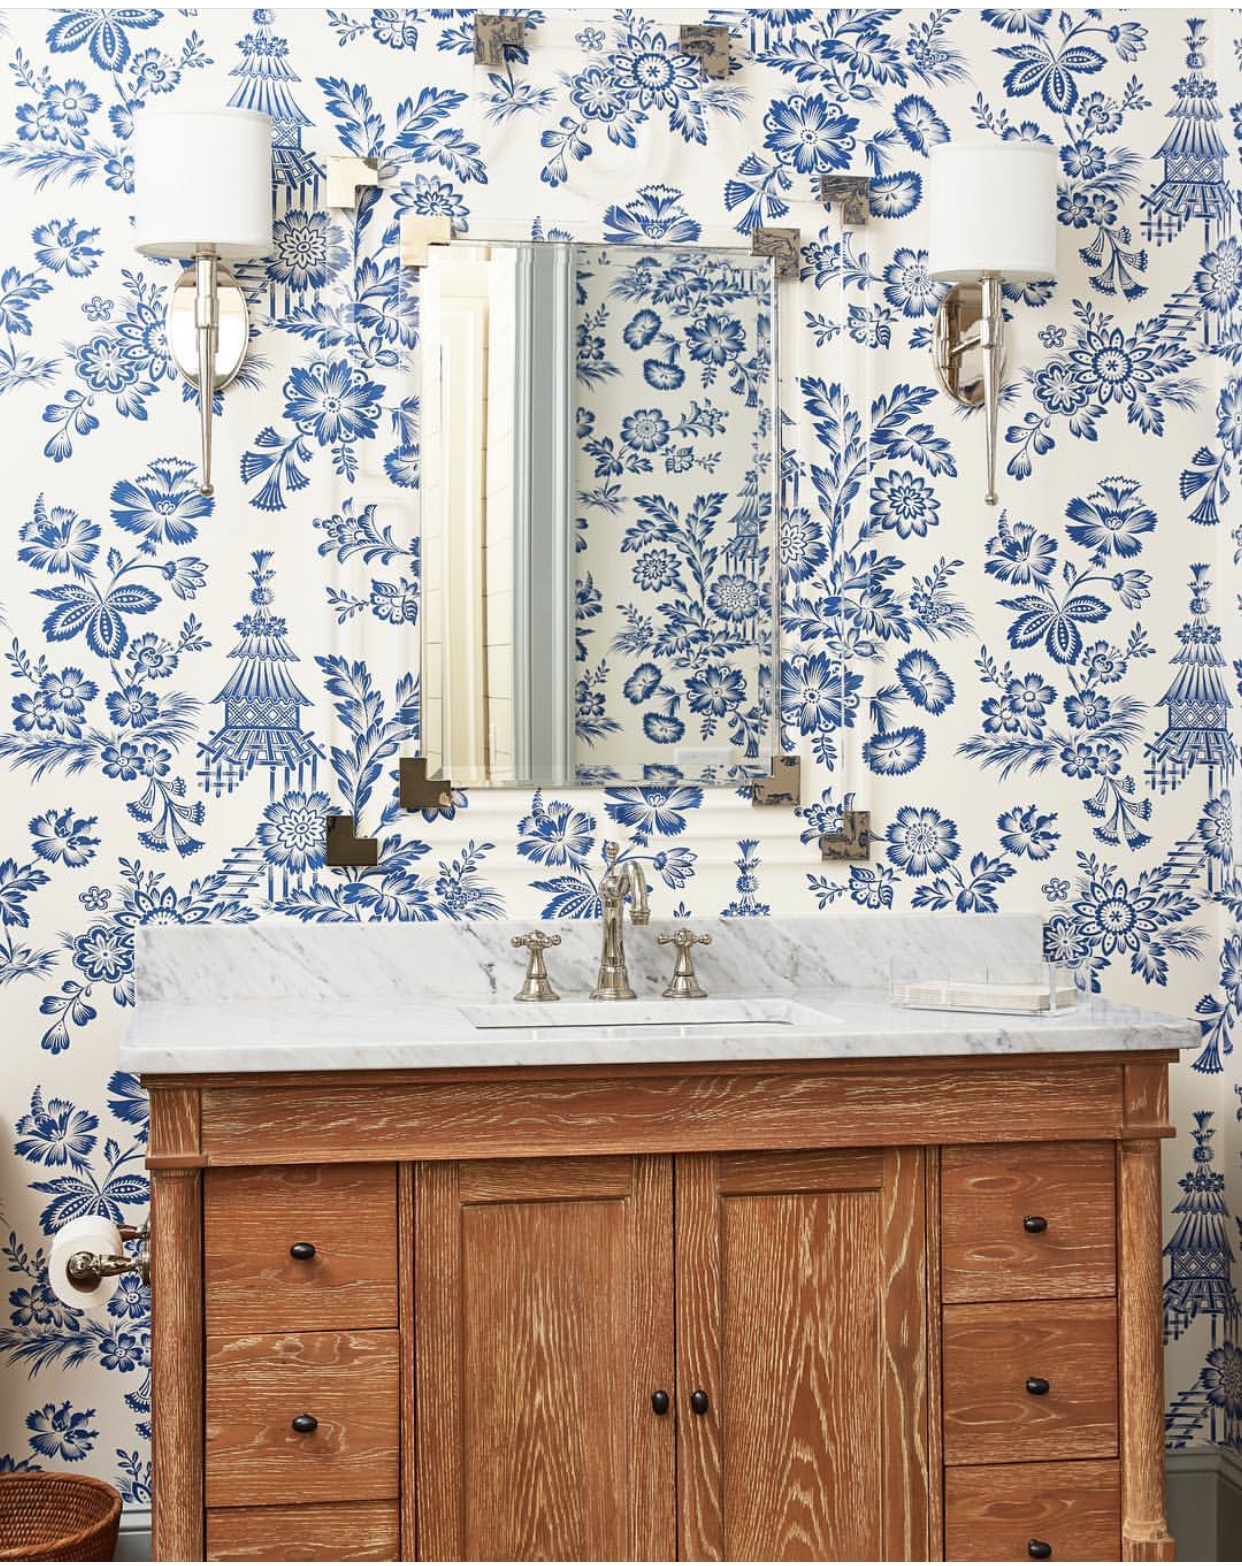 *half bath inspiration. That blue and white wall paper, lucite mirror, wood vanity and marble countertops SPEAKS to me.  